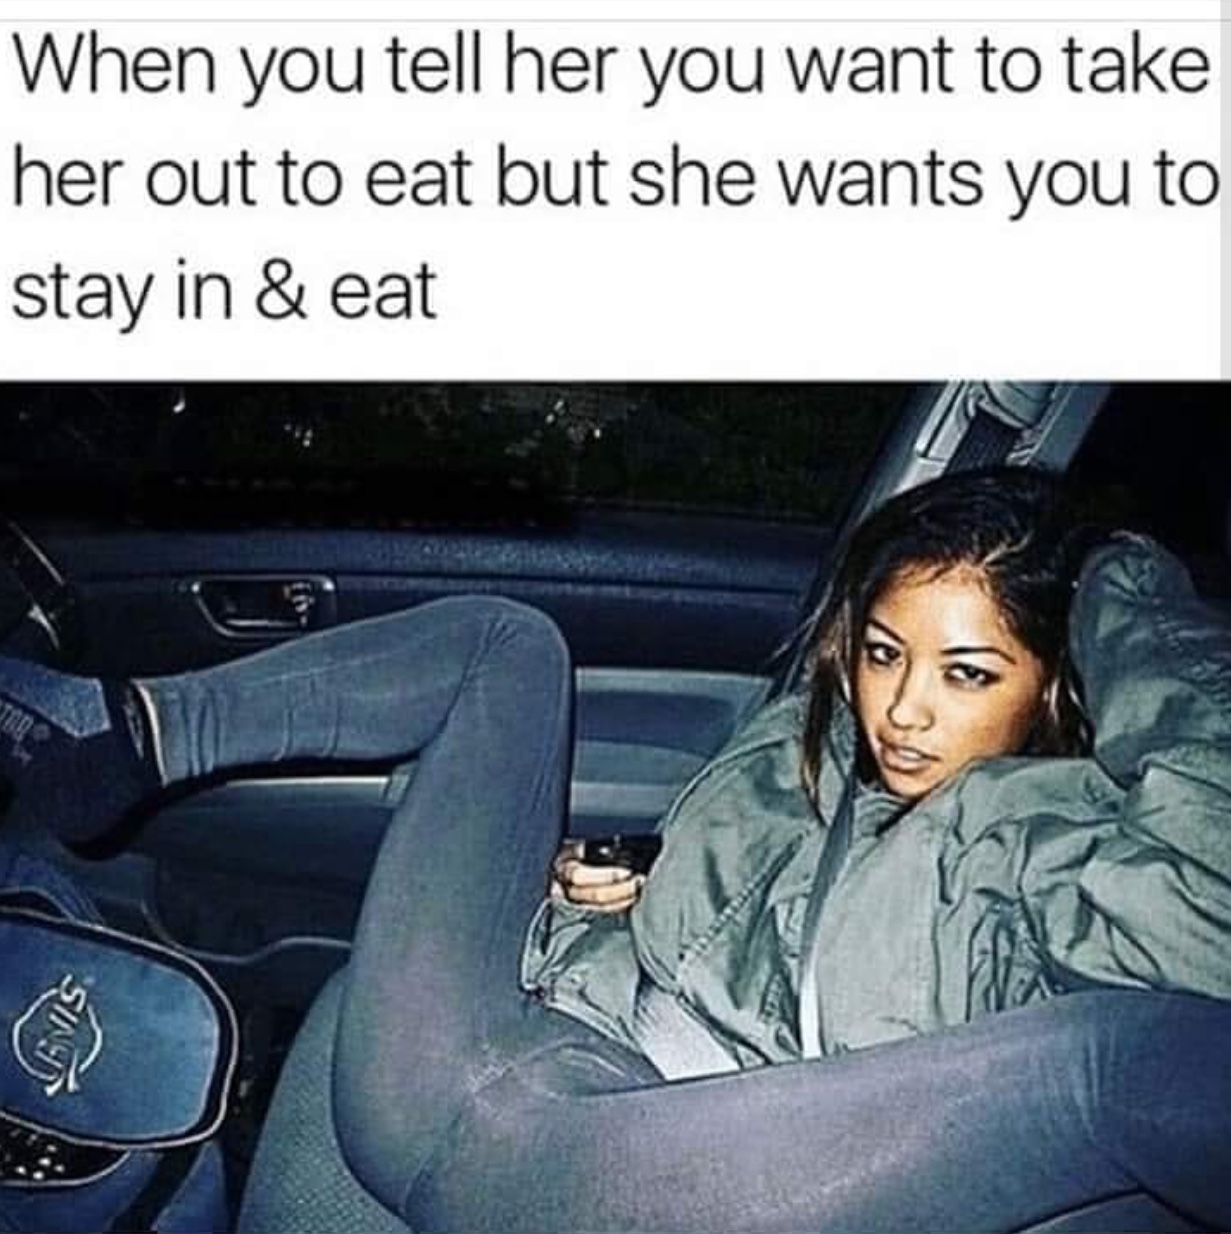 photo caption - When you tell her you want to take her out to eat but she wants you to stay in & eat